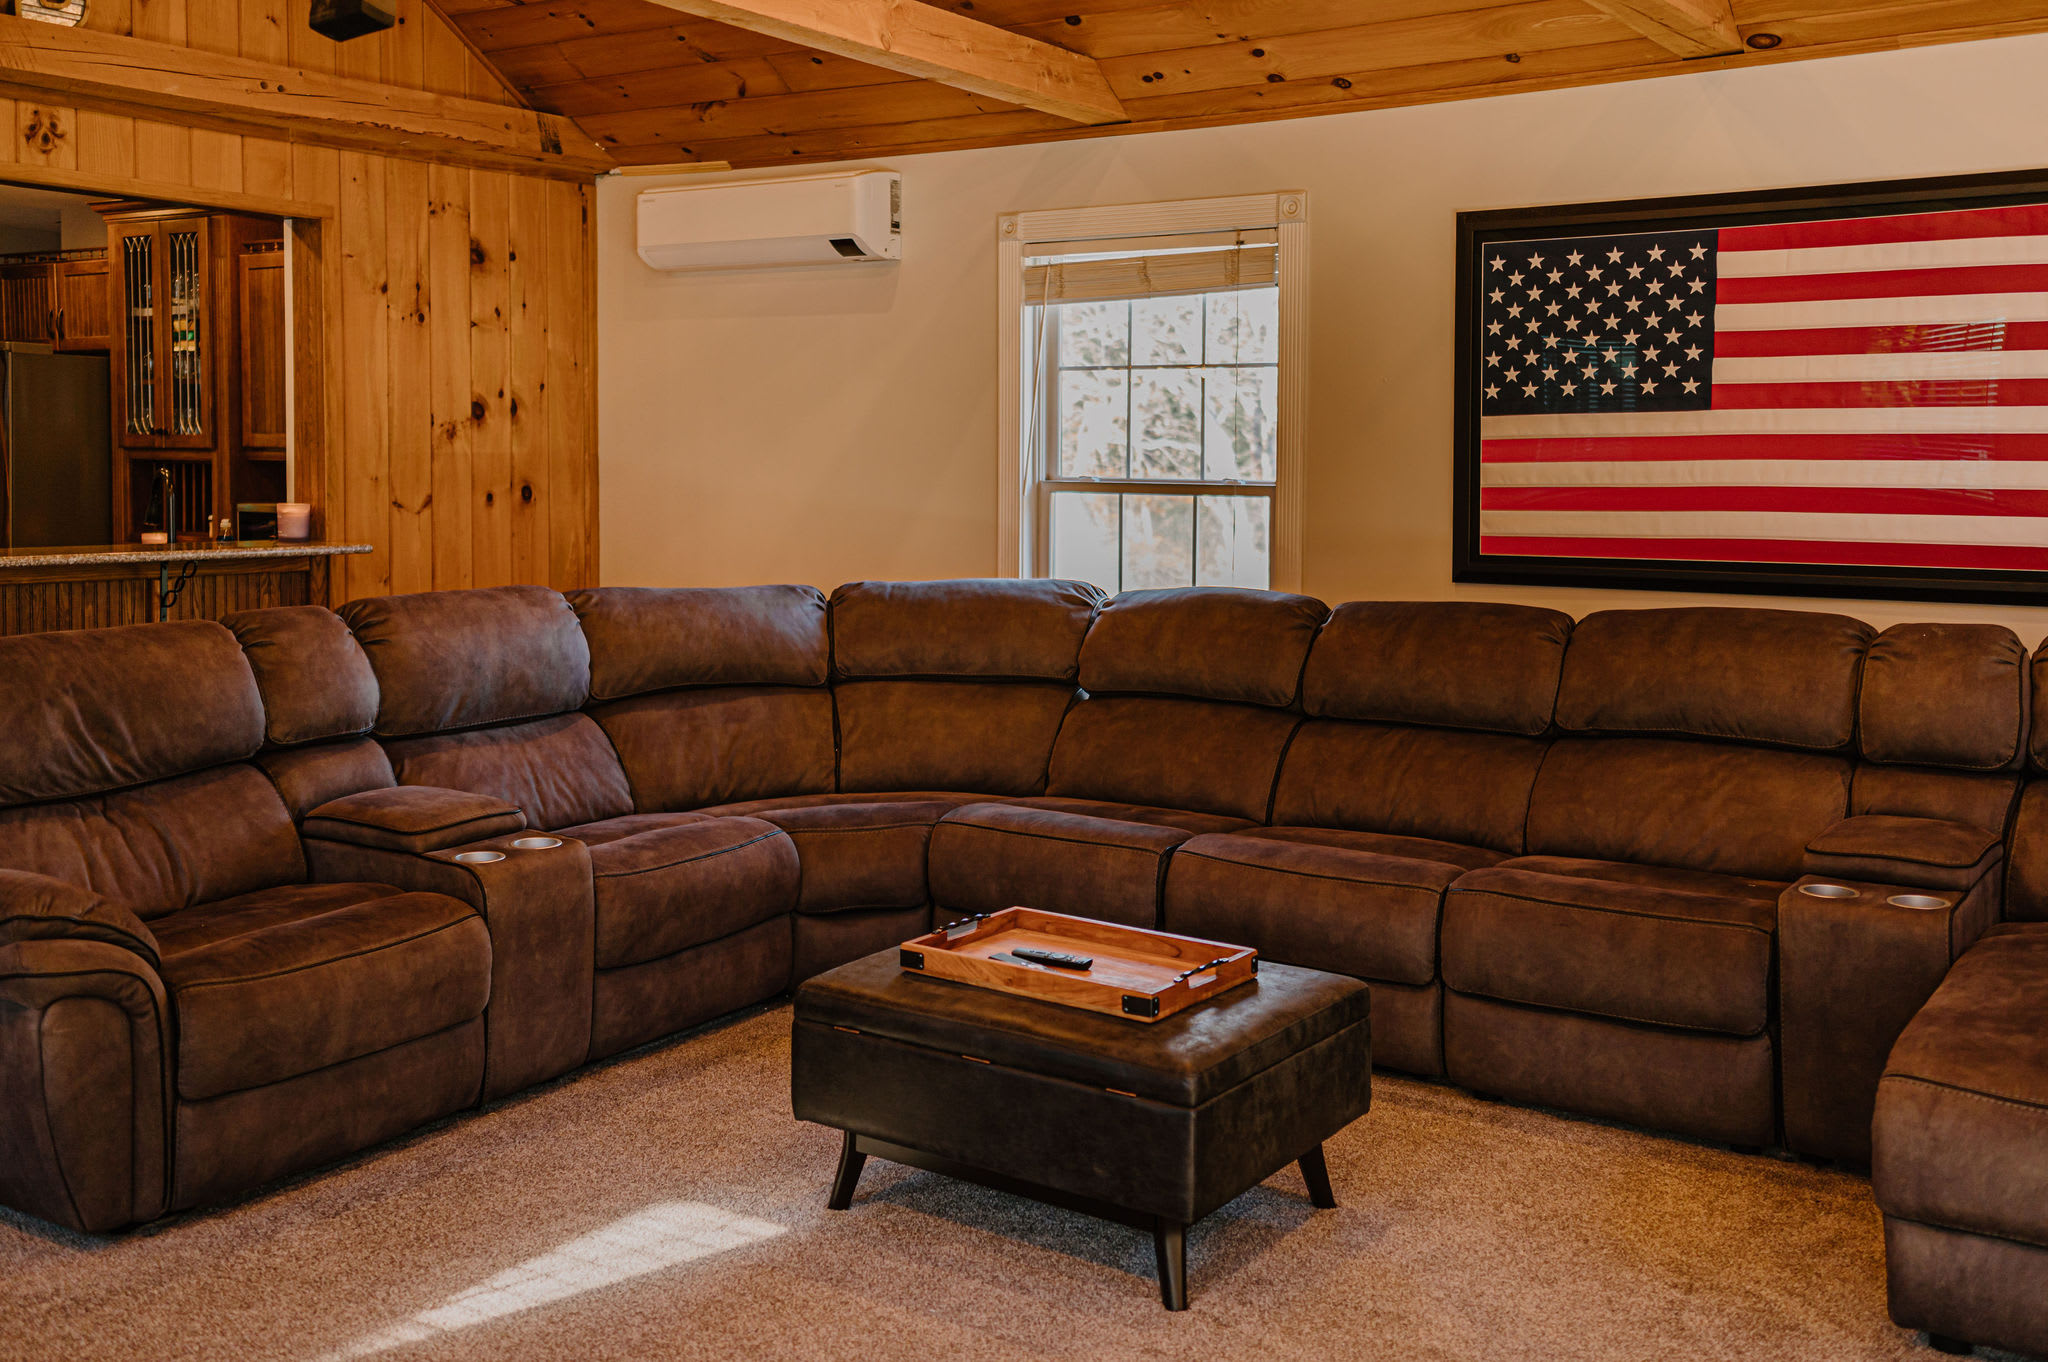 Spacious living room features a super comfy sectional and a 75" Smart TV for the game and movie nights.